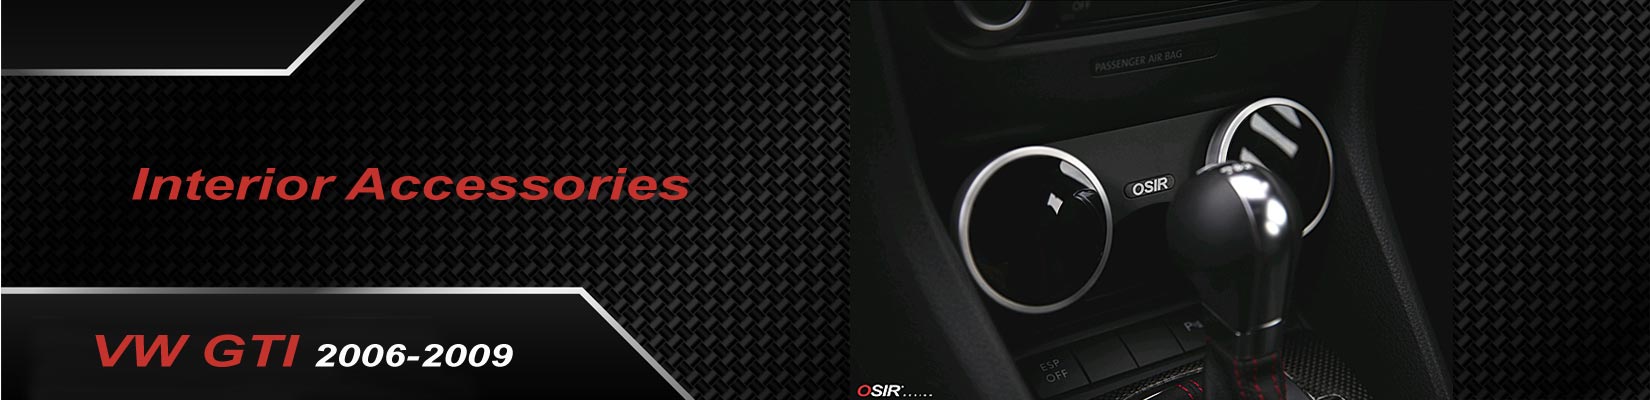 VW GTI Accessories, Clothing and Merchandise